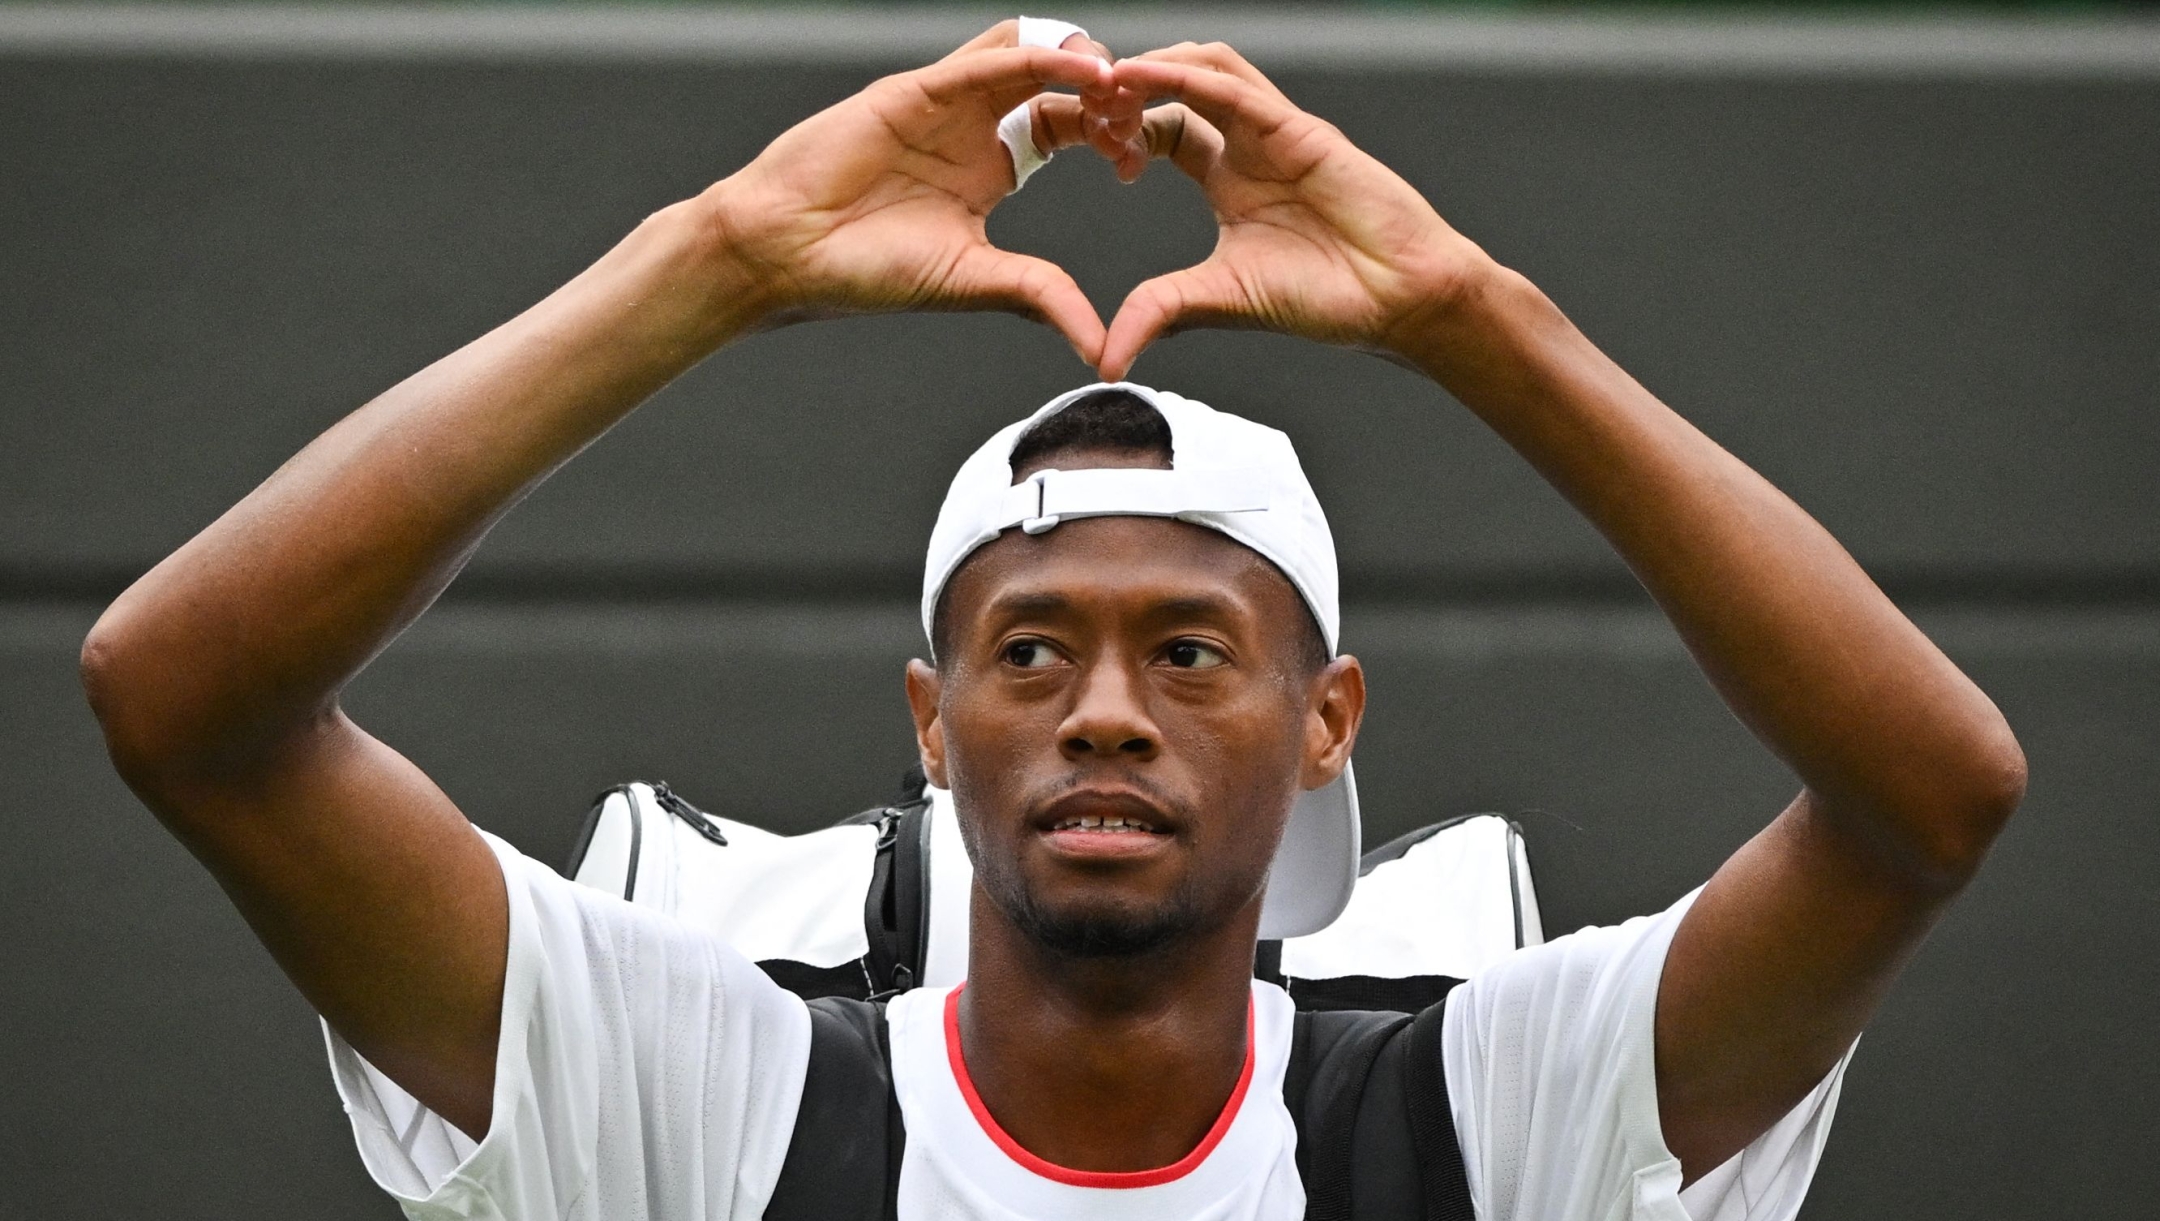 US player Christopher Eubanks does a heart with his hands as he acknowledges the audience while leaving the court following his defeat against Russia's Daniil Medvedev during their men's singles quarter-finals tennis match on the tenth day of the 2023 Wimbledon Championships at The All England Lawn Tennis Club in Wimbledon, southwest London, on July 12, 2023. (Photo by Glyn KIRK / AFP) / RESTRICTED TO EDITORIAL USE